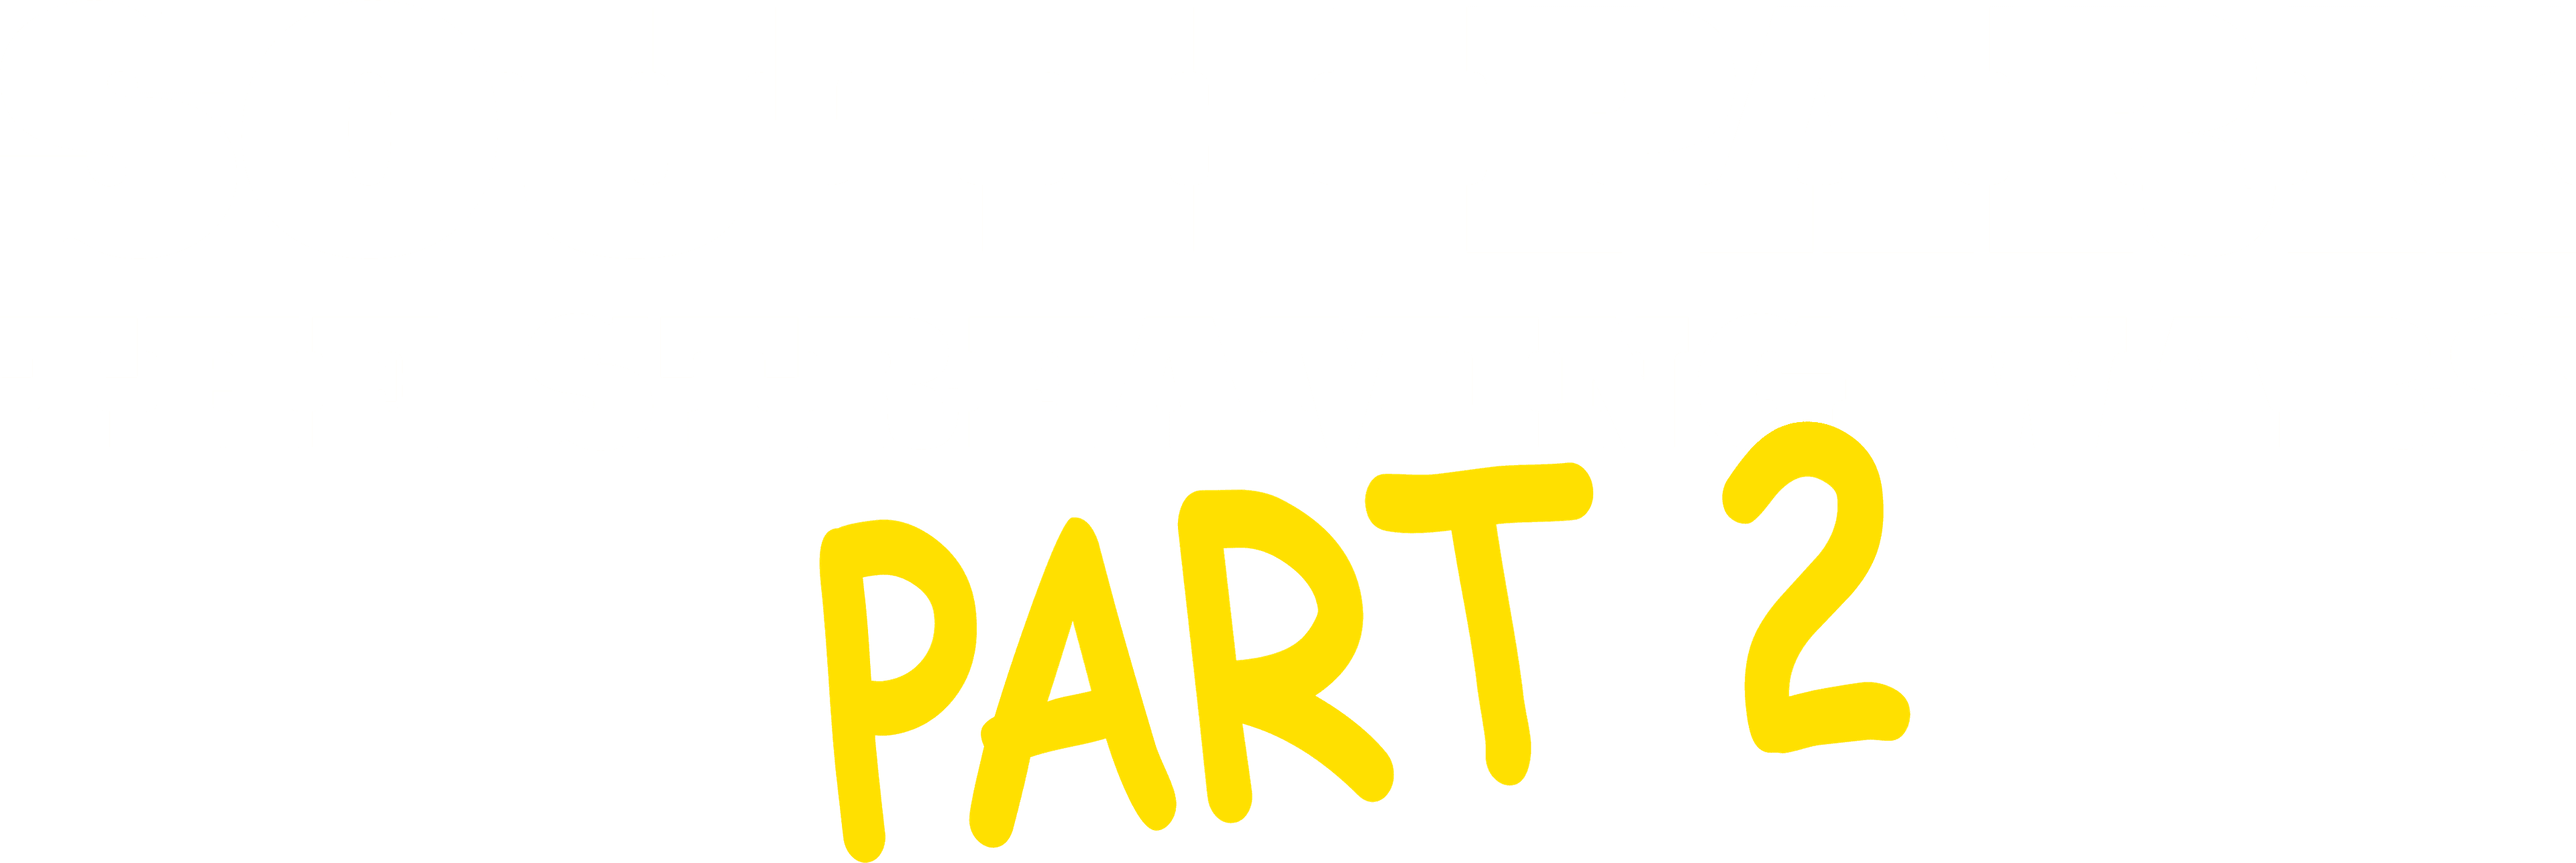 South Park the Streaming Wars Part 2 logo